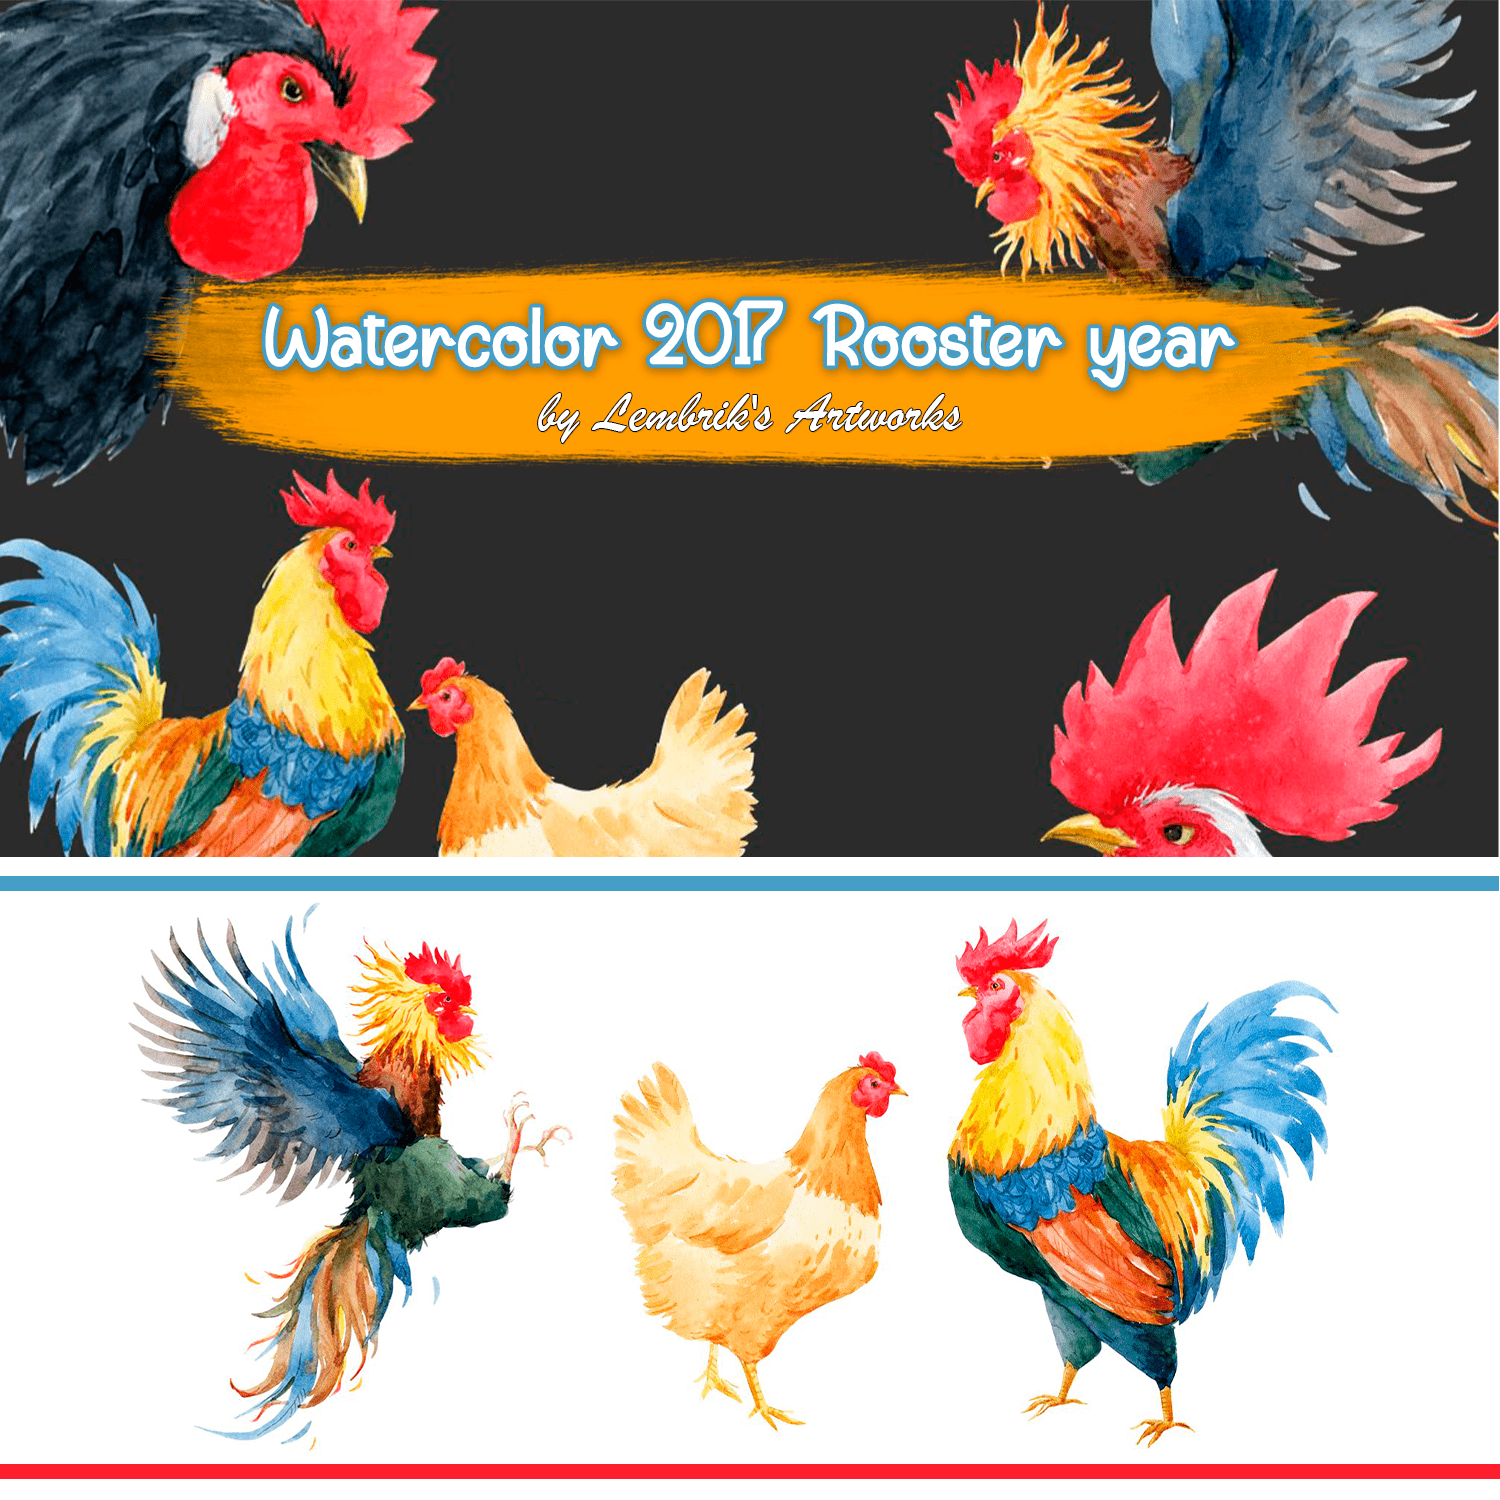 Watercolor 2017 Rooster year cover.